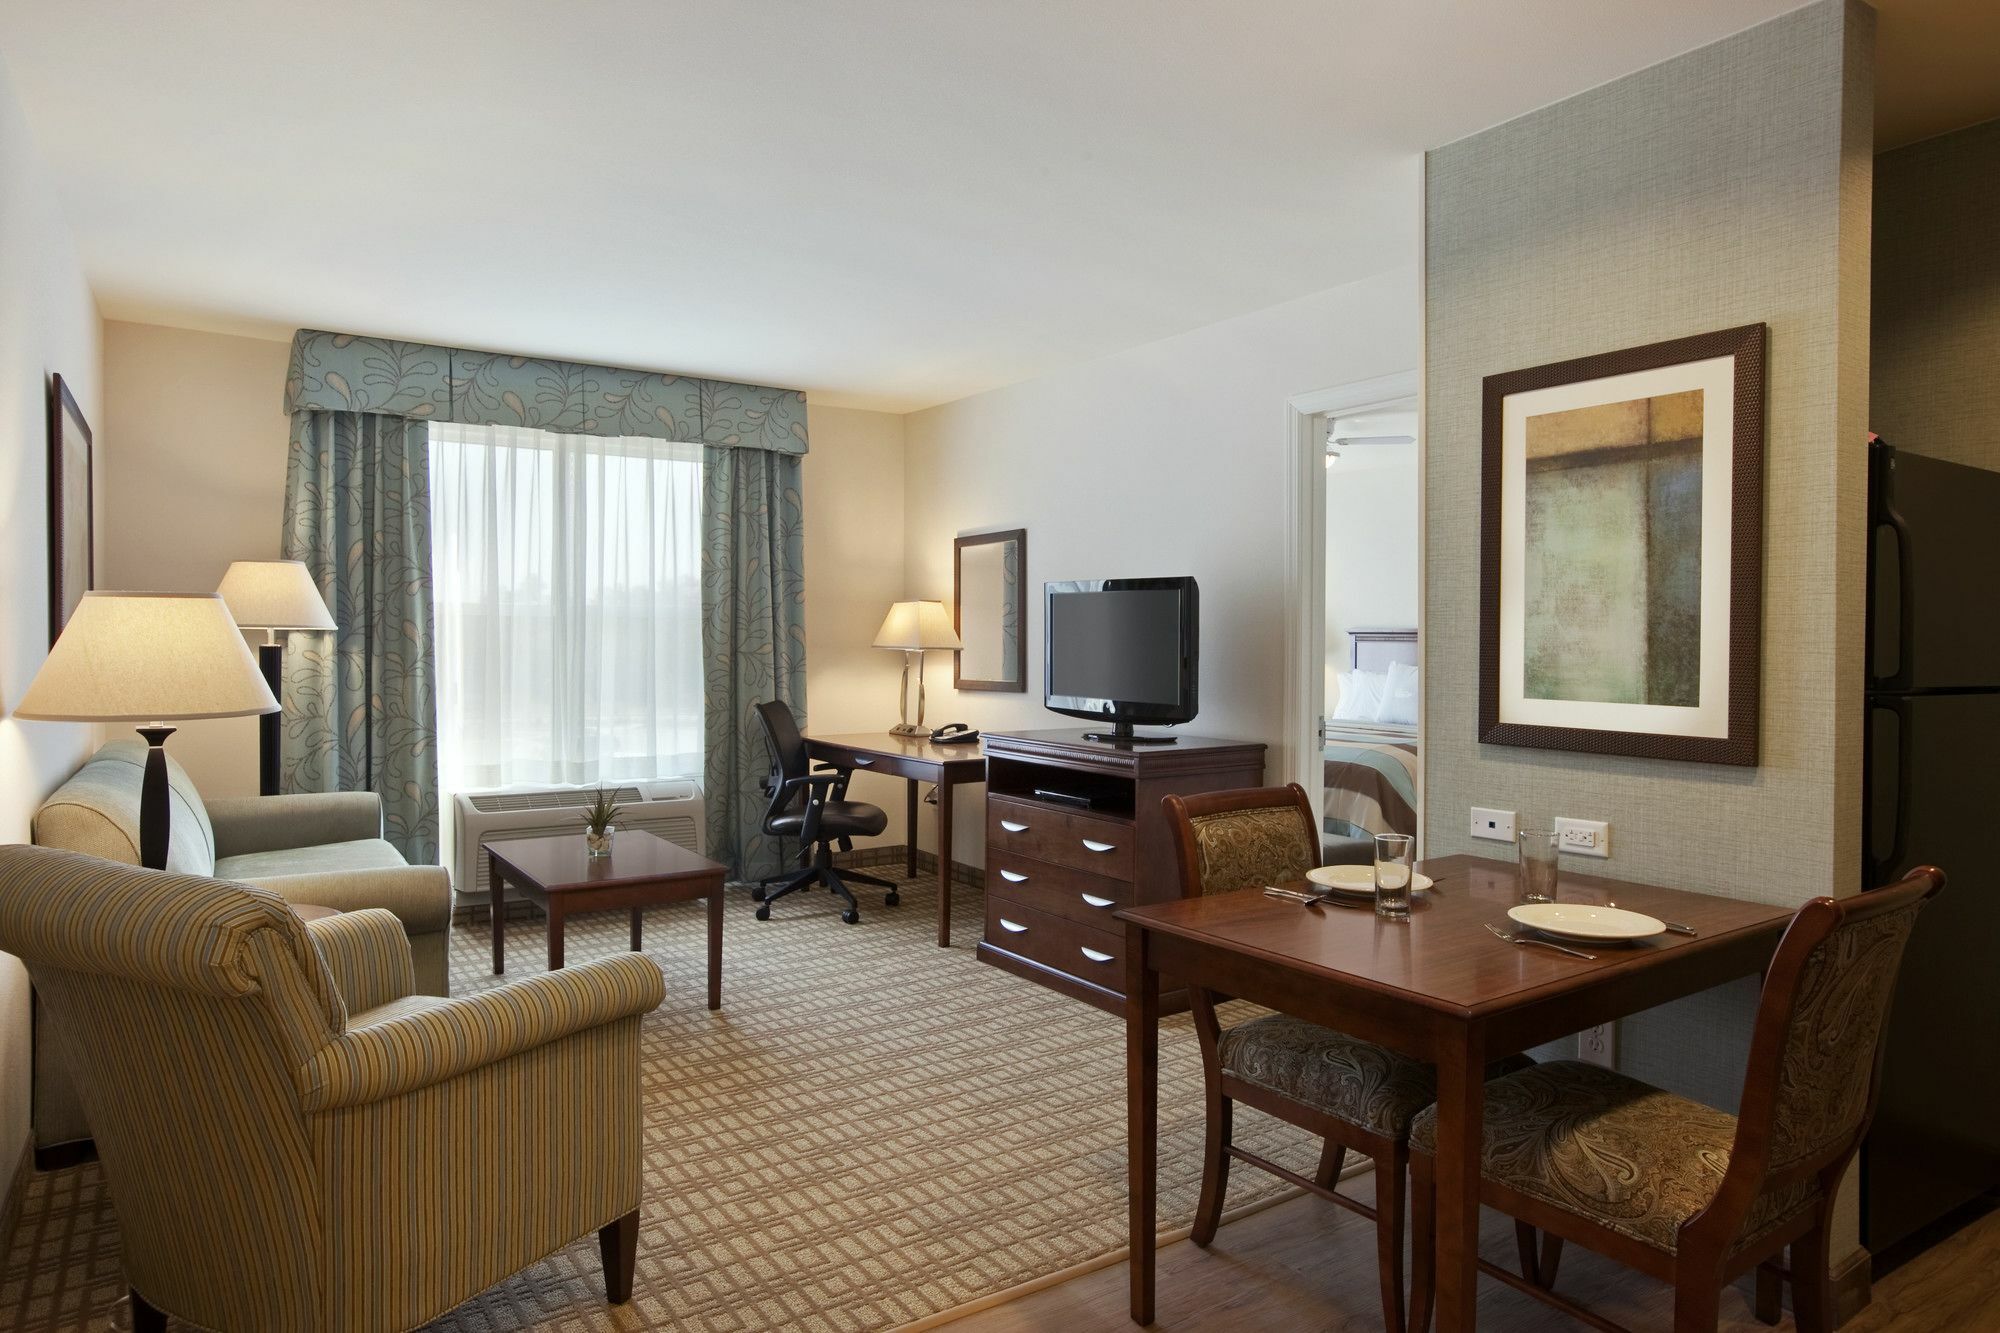 Homewood Suites By Hilton Wilmington/Mayfaire, Nc Chambre photo